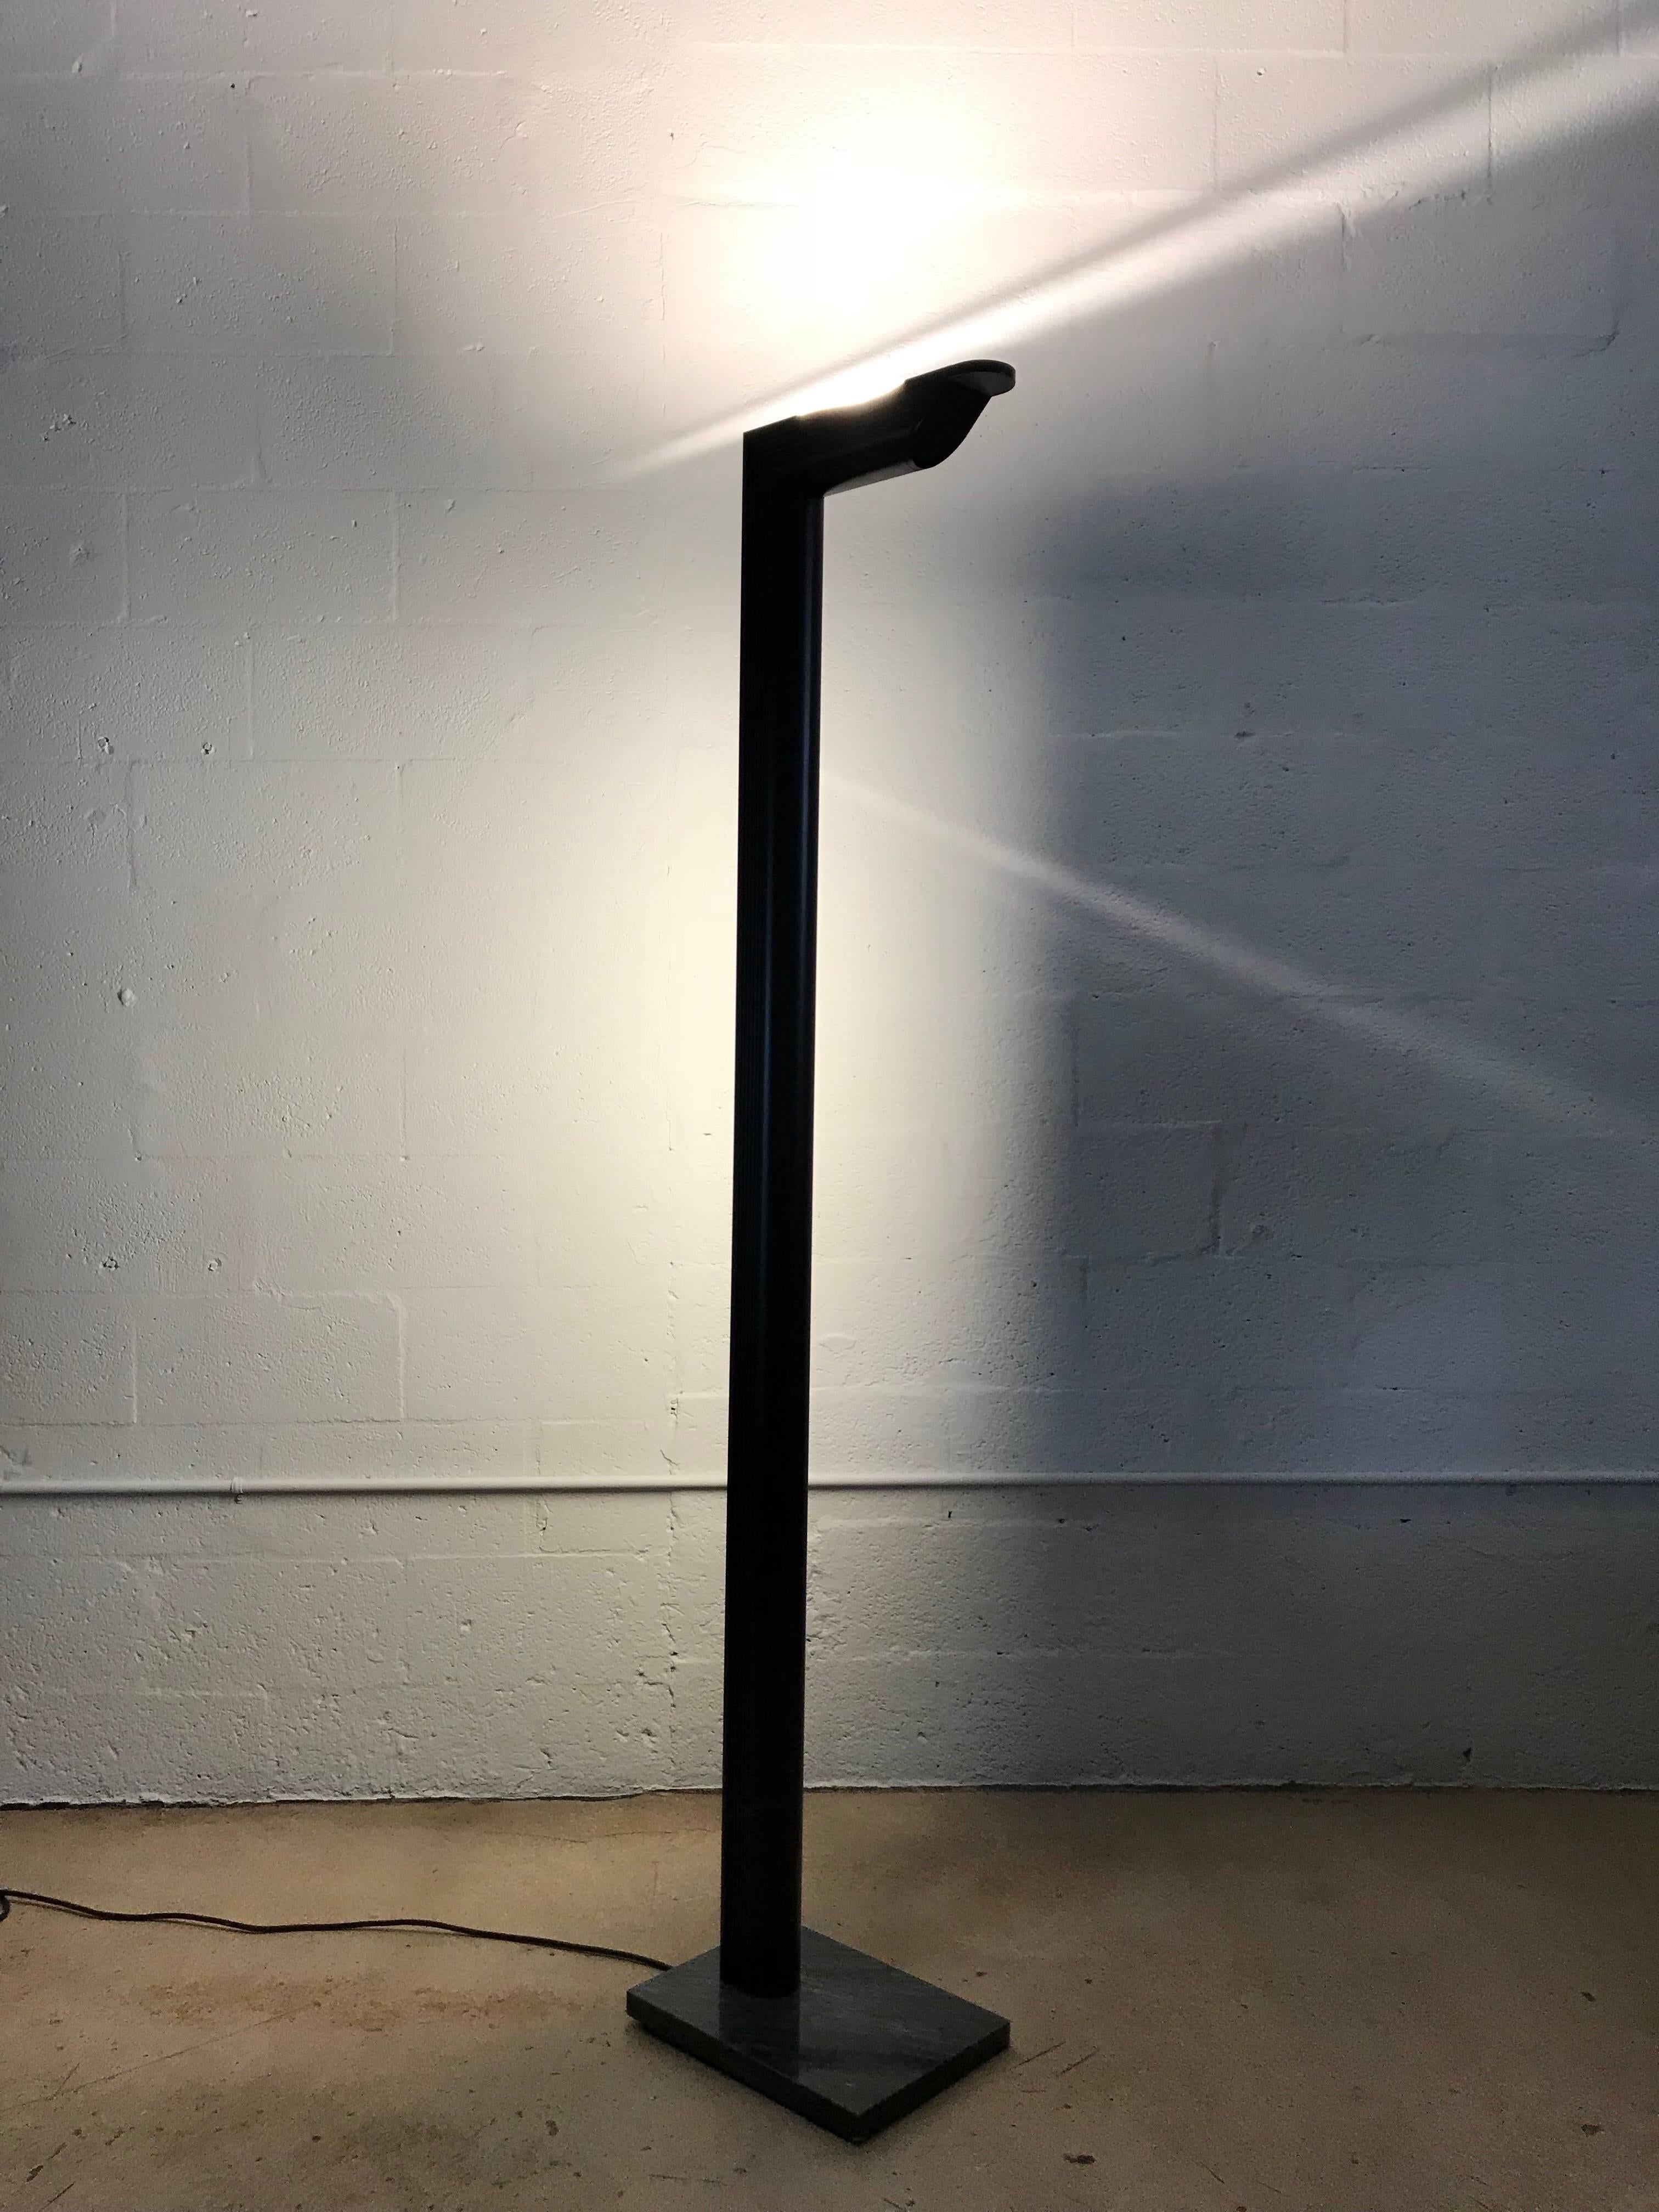 Black Postmodern floor lamp, with a marble base and light sources from the rear and top.